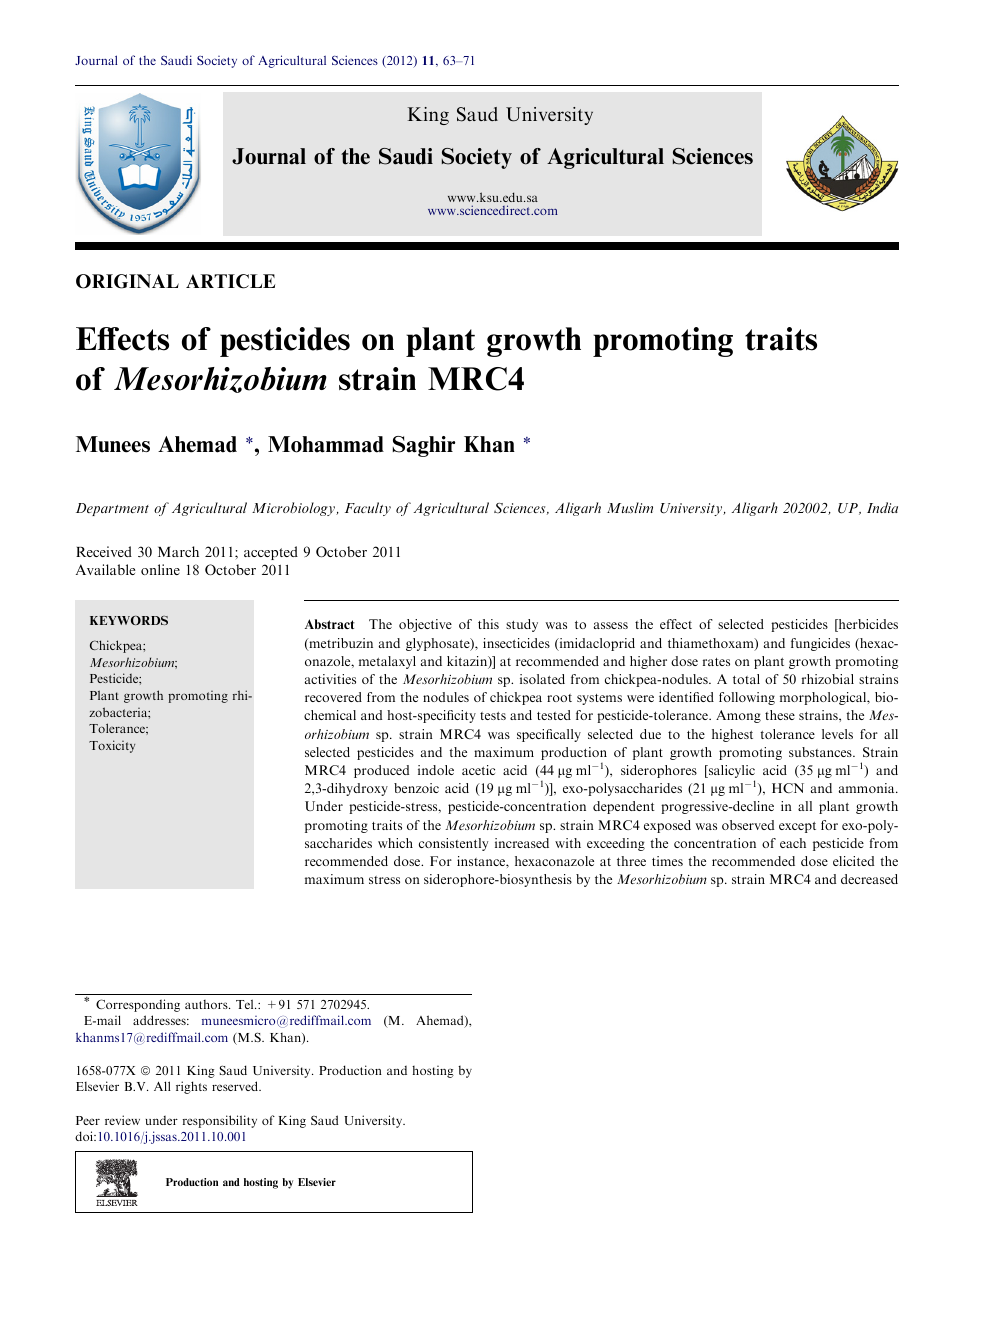 Effects Of Pesticides On Plant Growth Promoting Traits Of